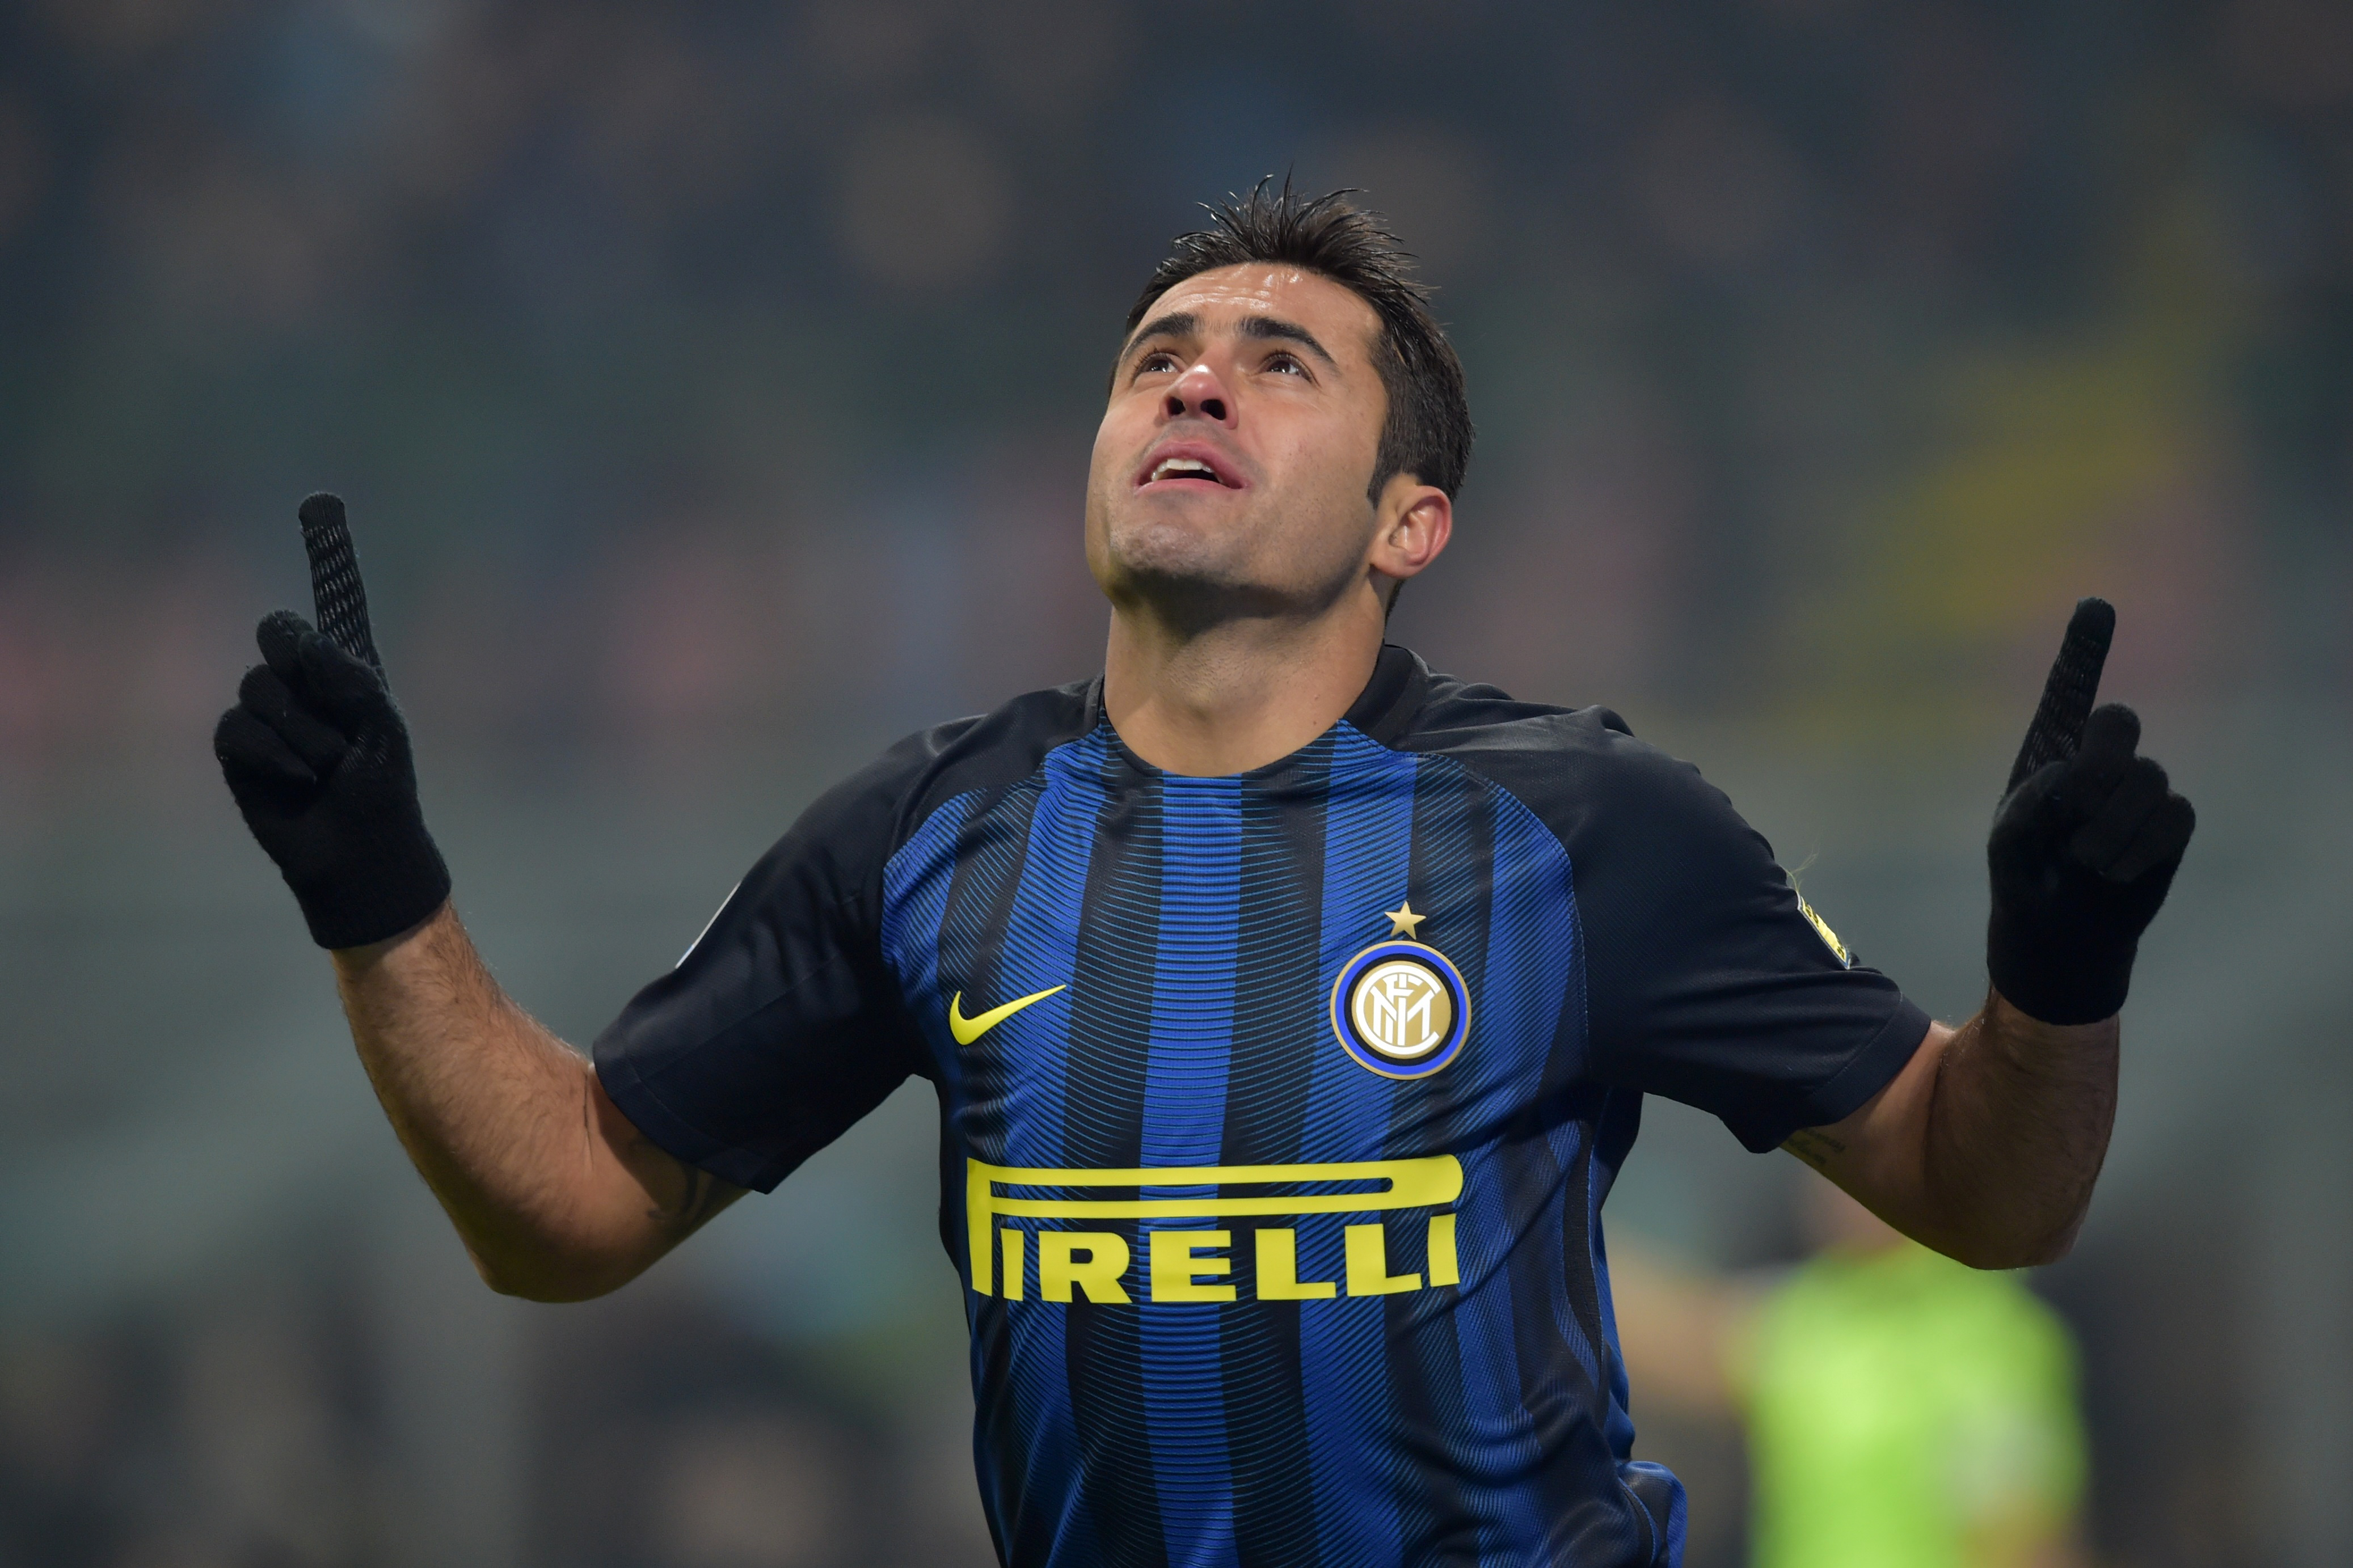 Ex-Inter Forward Eder: “I Am Very Happy For Antonio Candreva, I Remember The Years At Inter”